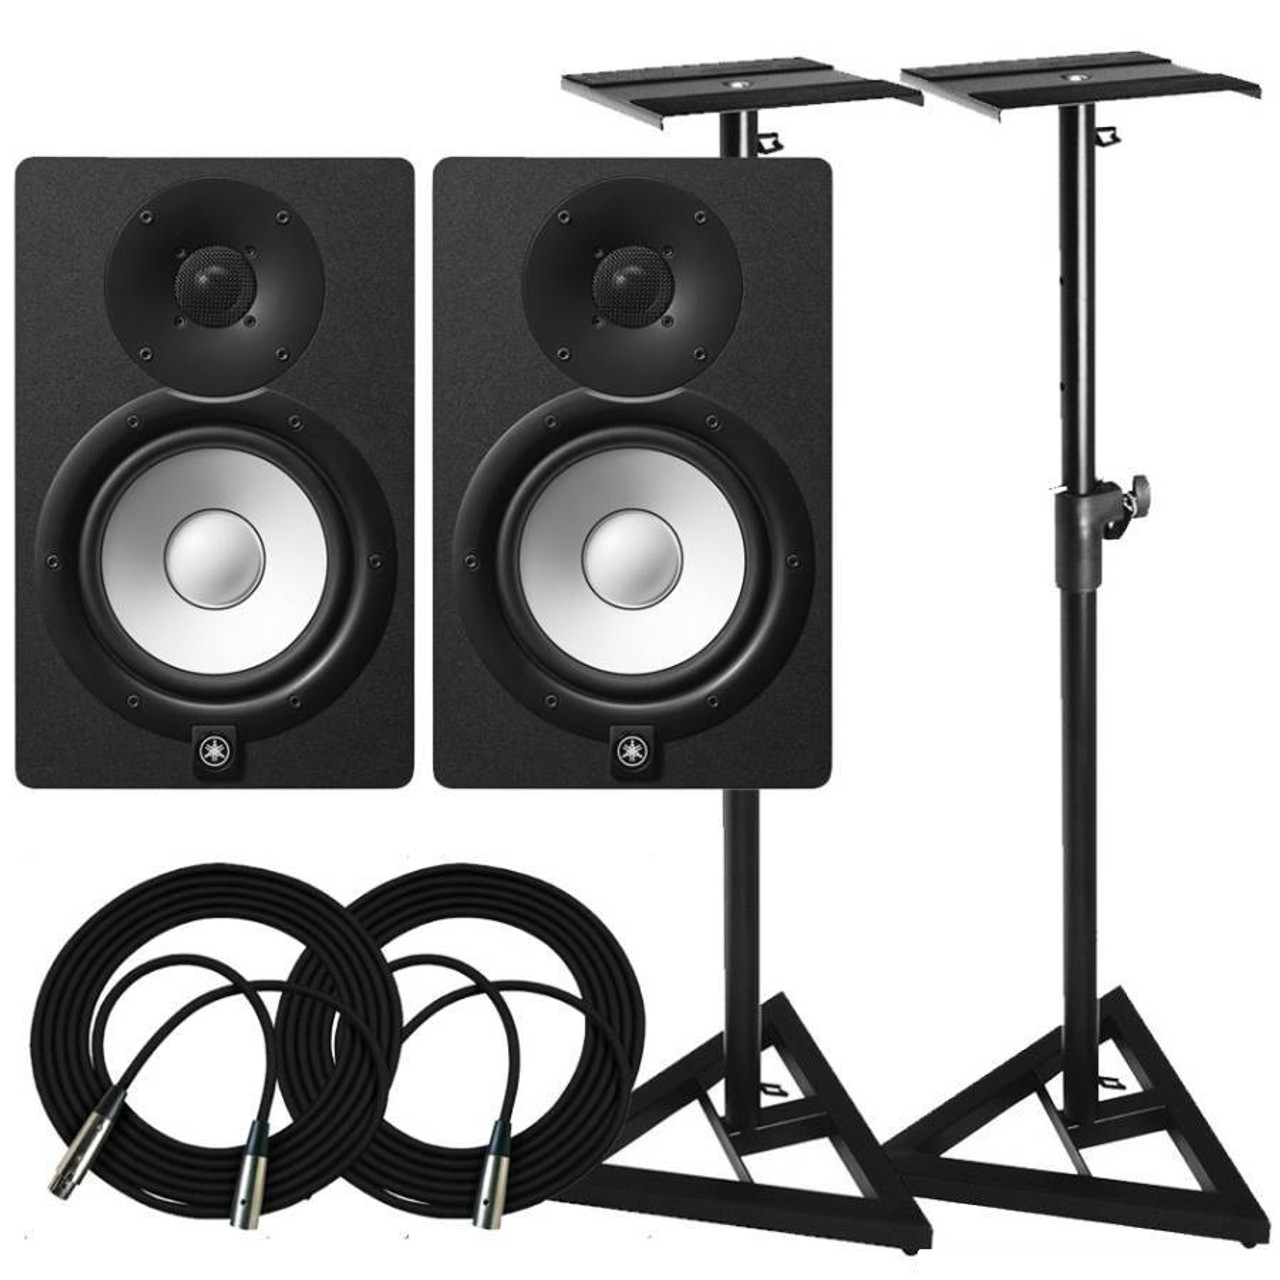 Yamaha HS7 White + Stands & Leads - The Disc DJ Store